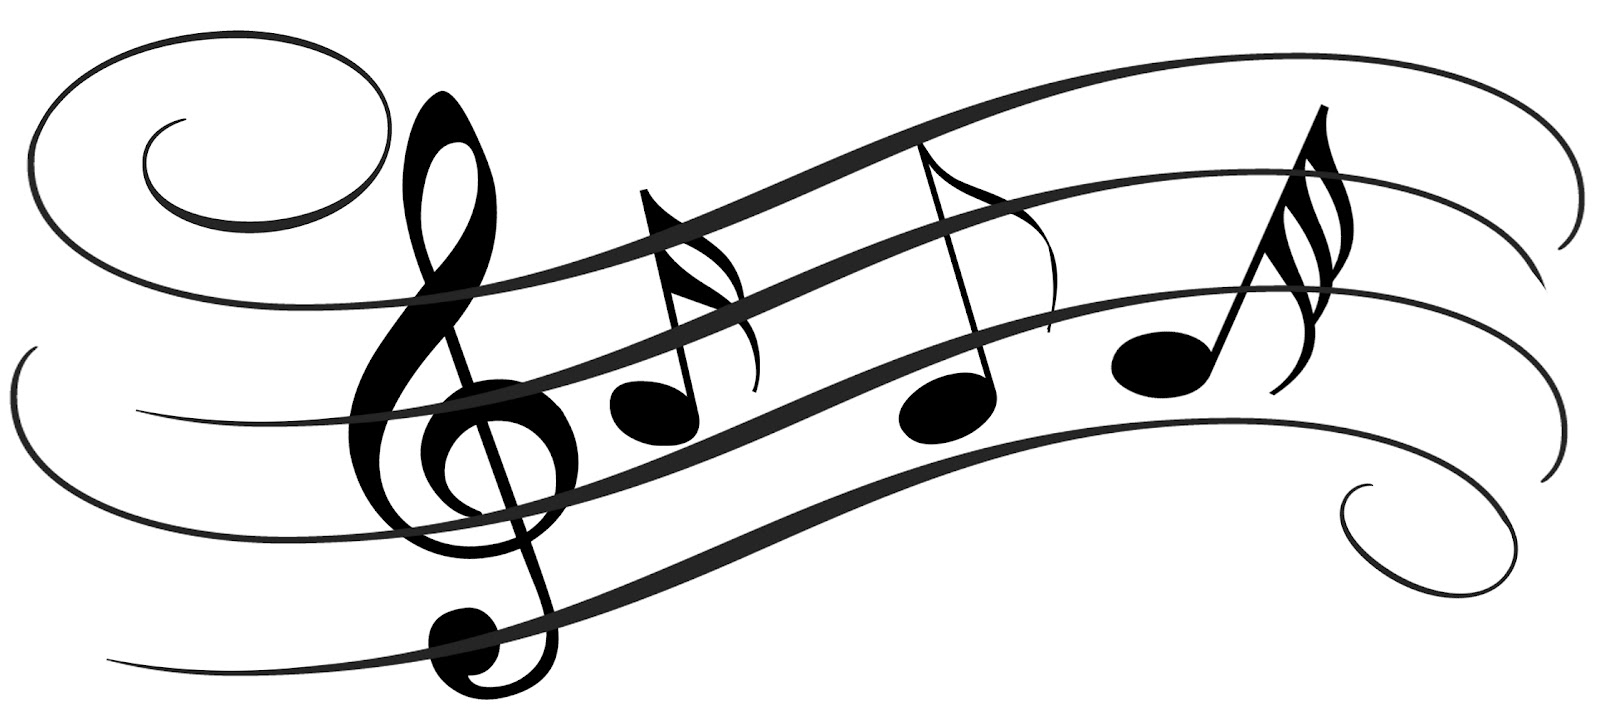 Clipart notes music